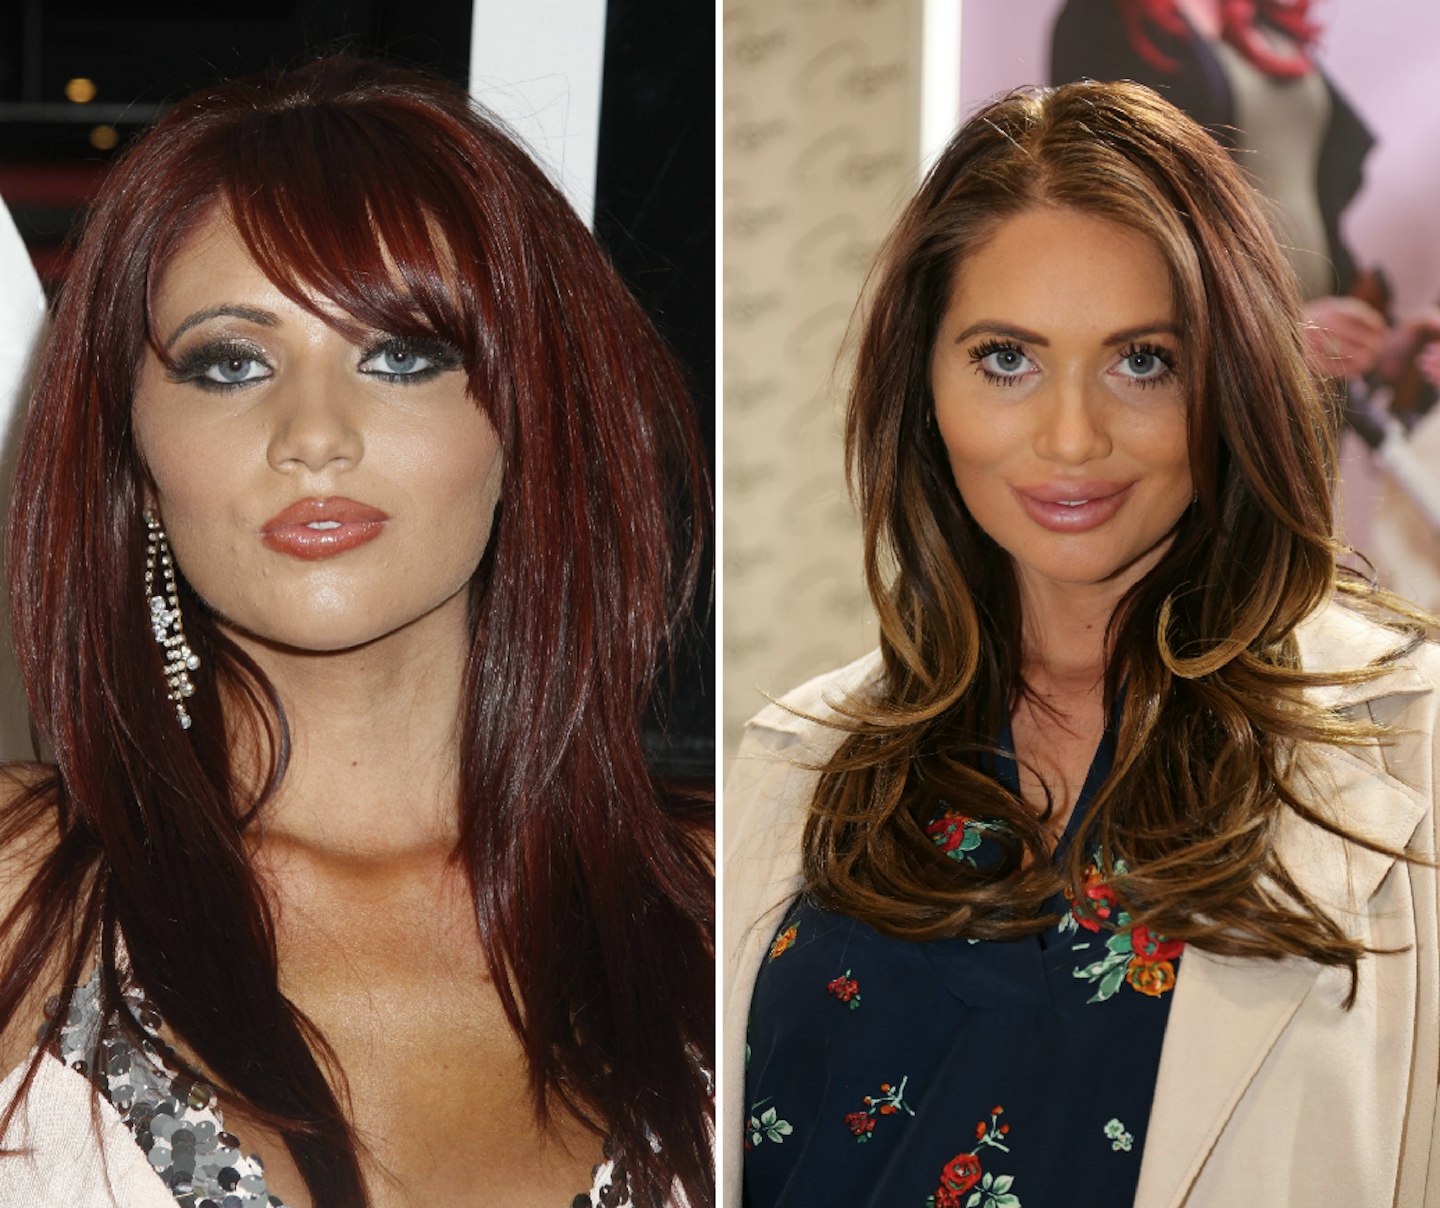 Amy Childs before and after plastic surgery